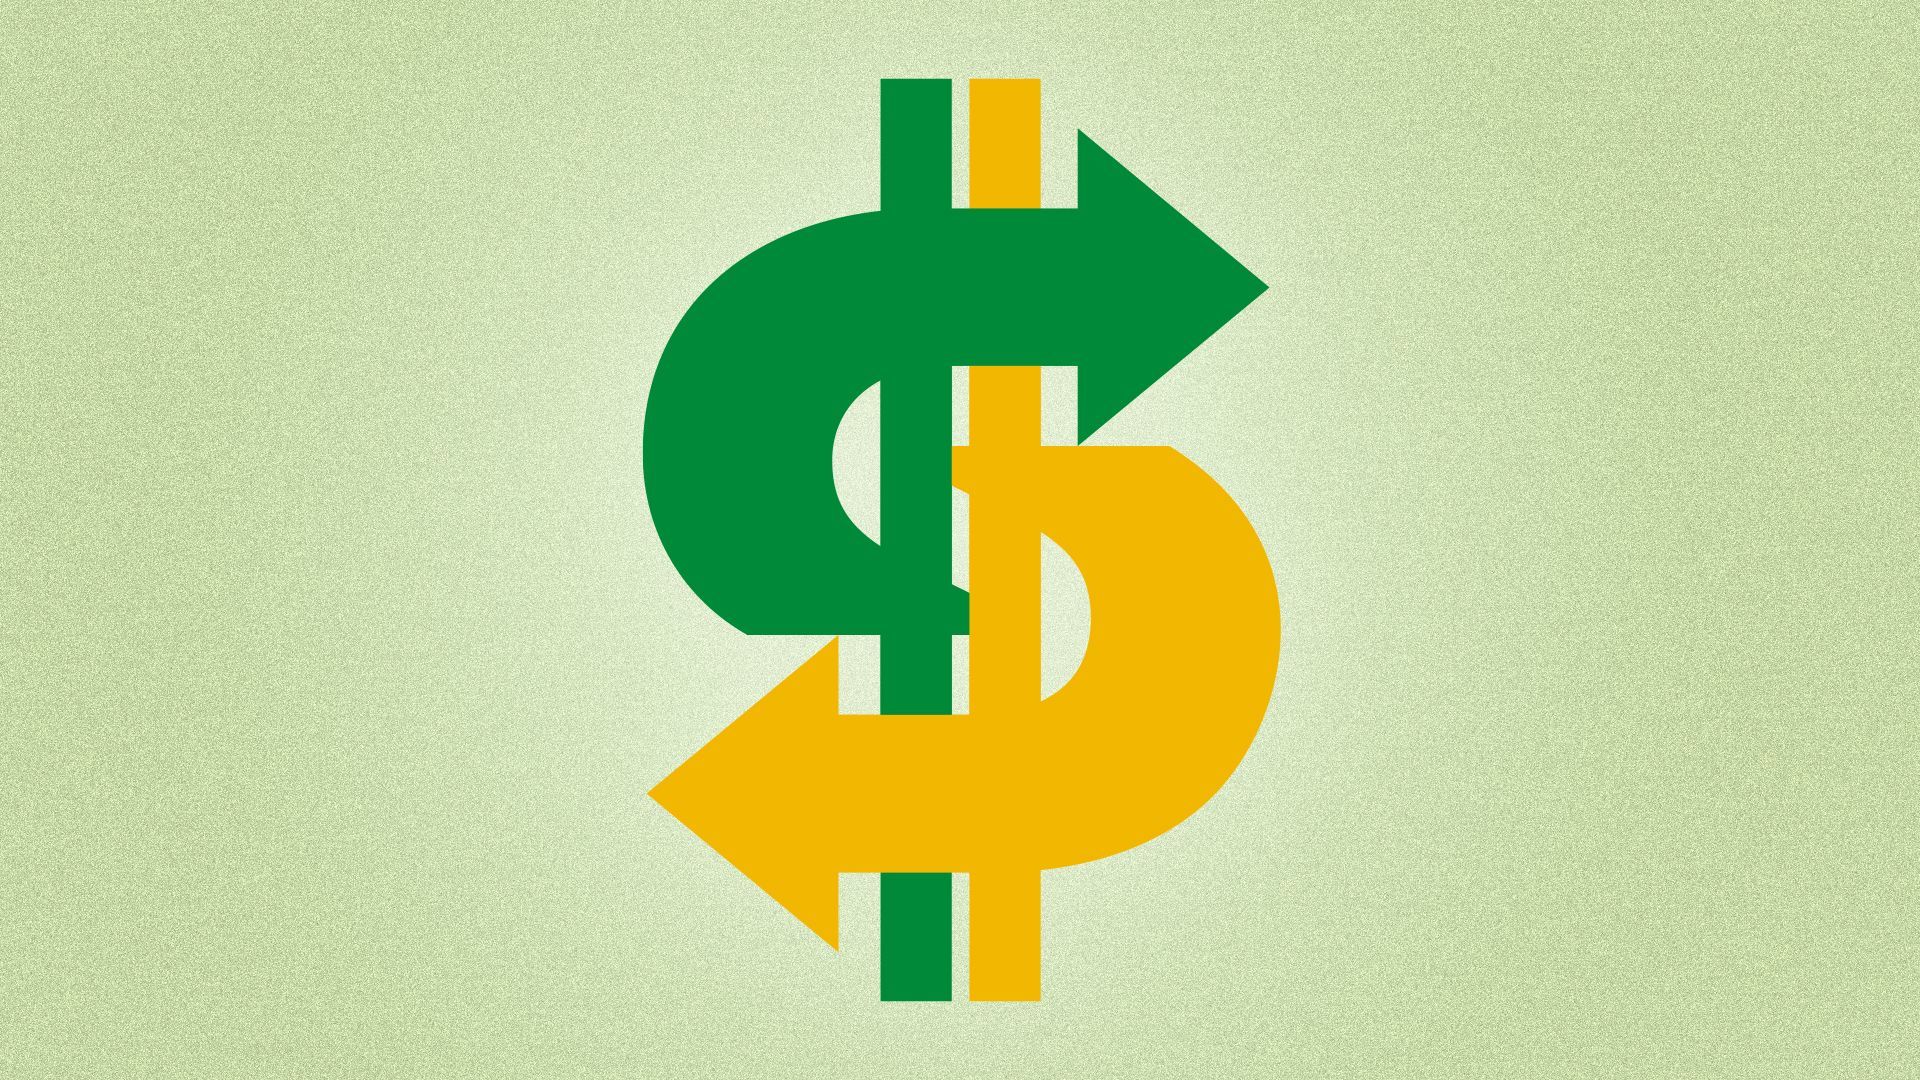 an illustration of a dollar sign created with the subway logo